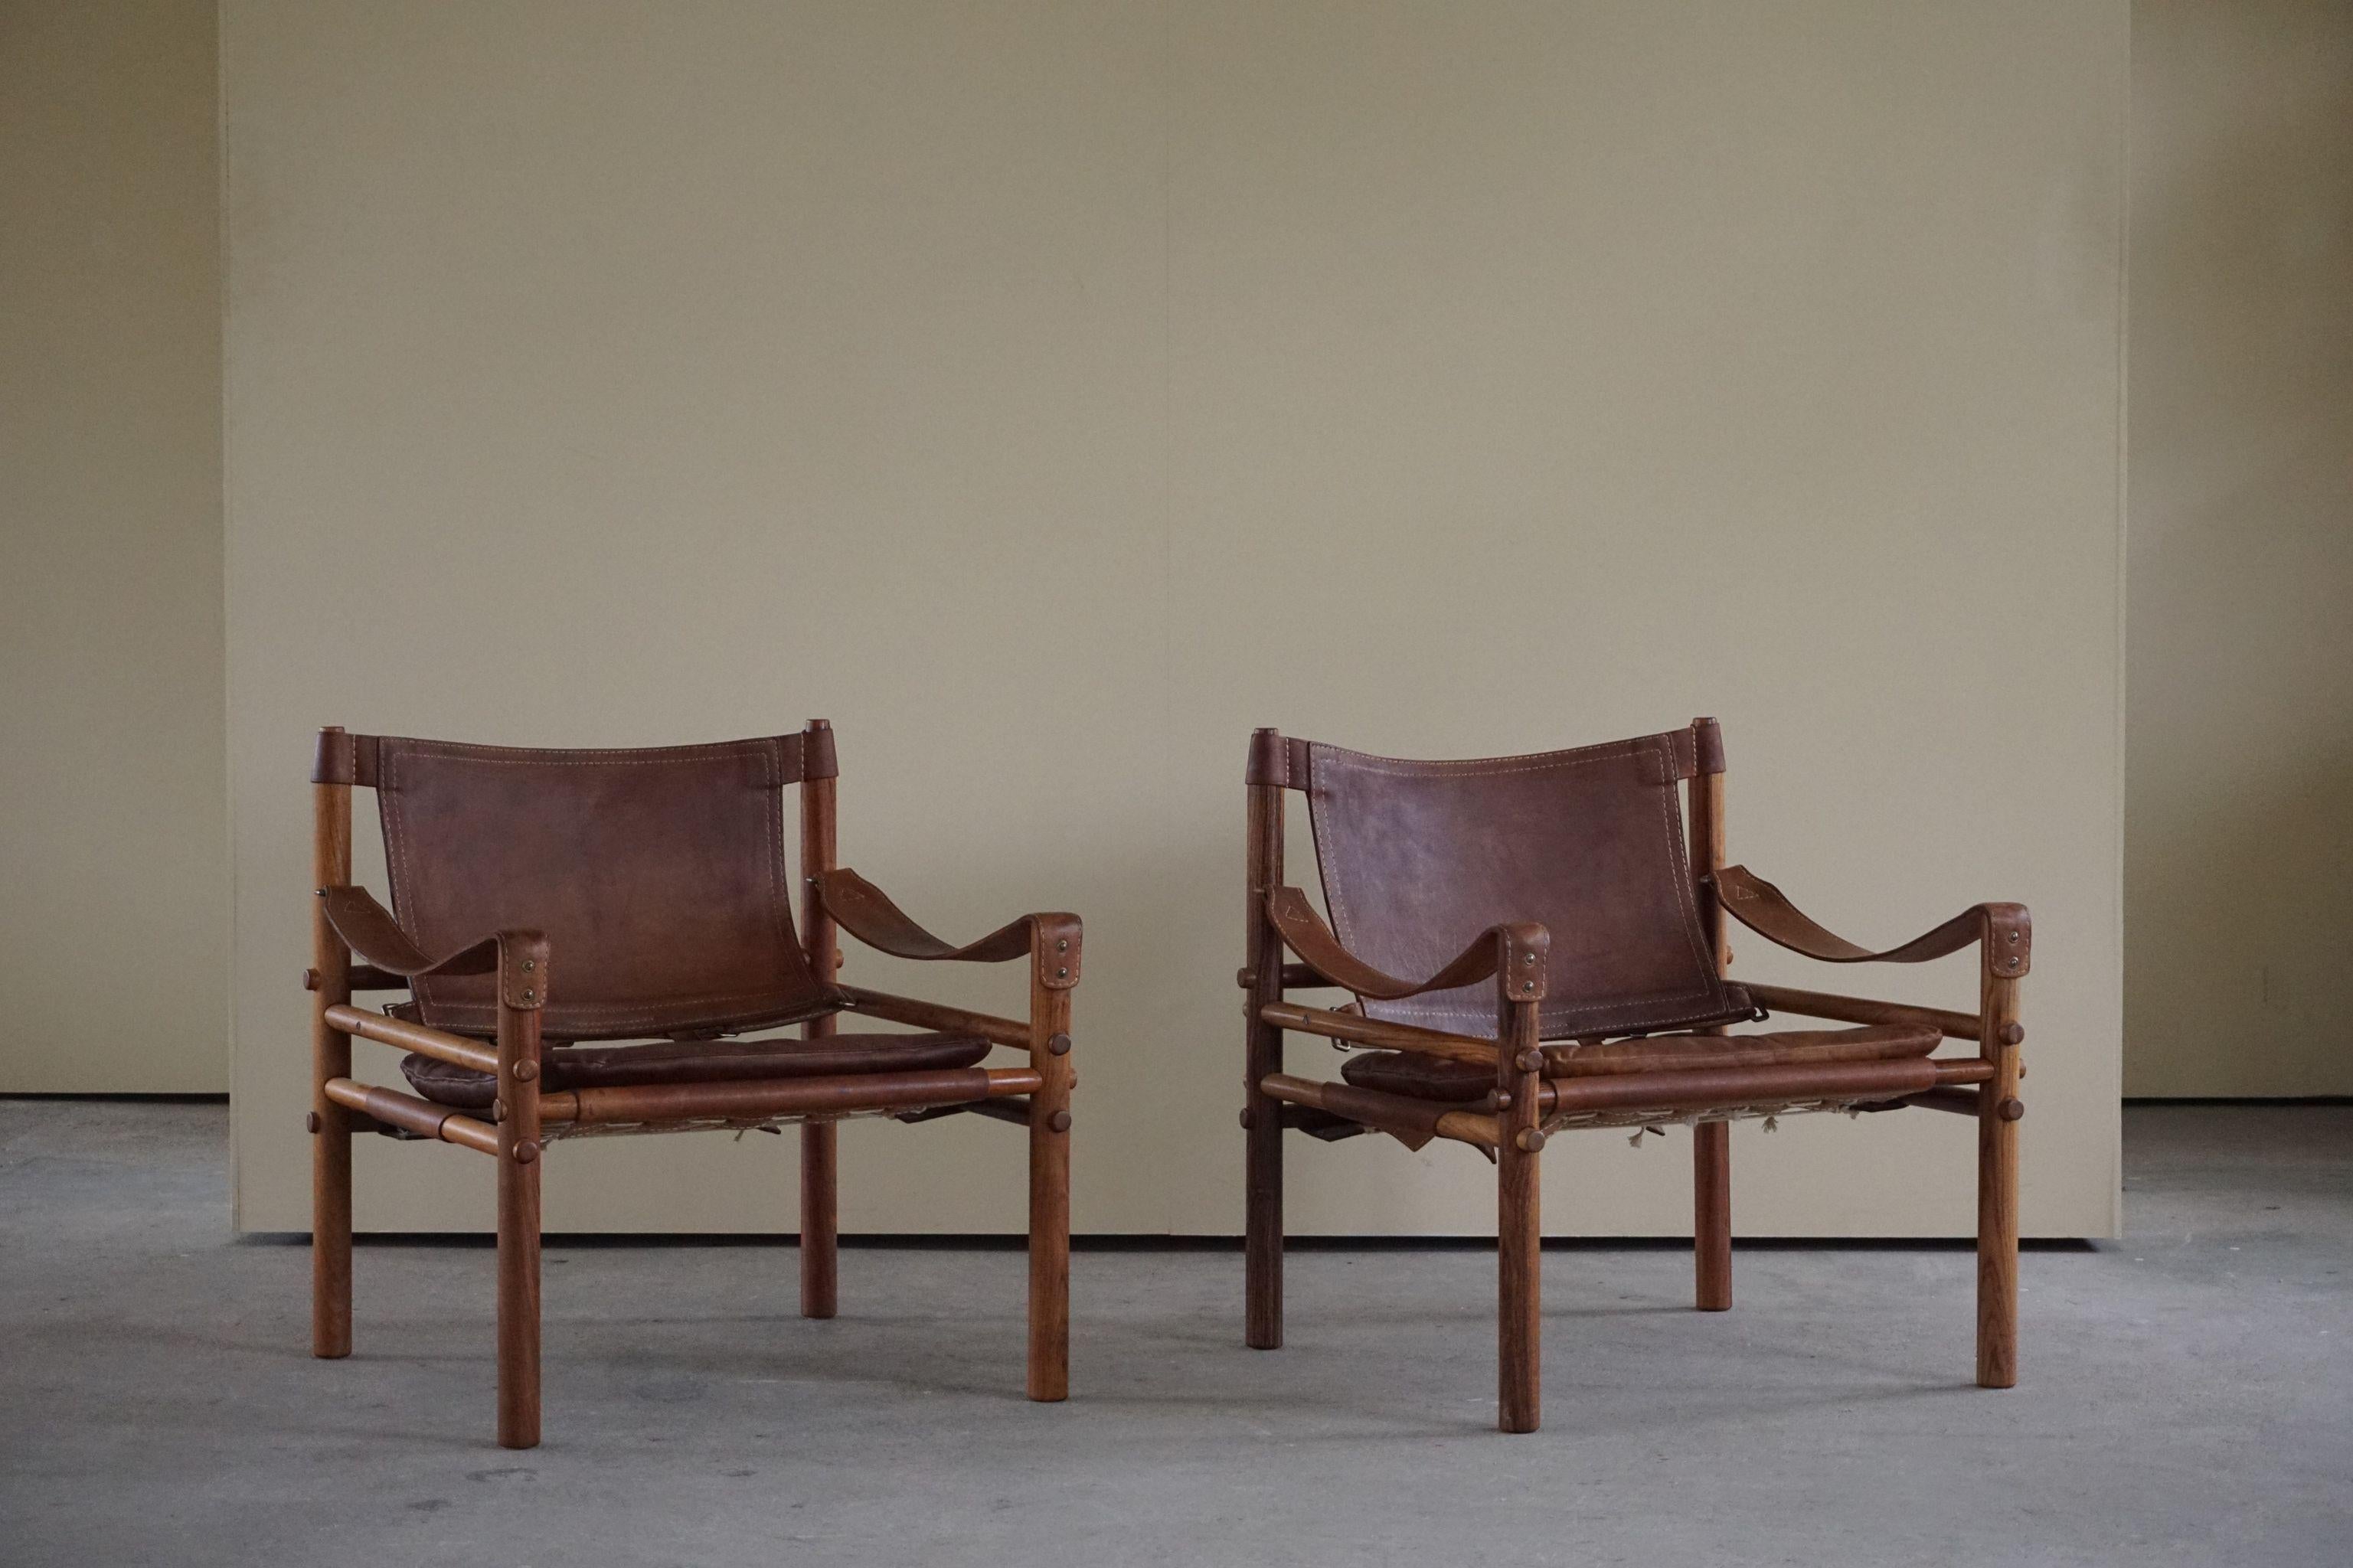 Pair of Sirocco Safari Chairs, Made by Arne Norell AB in Aneby Sweden, 1960s 7